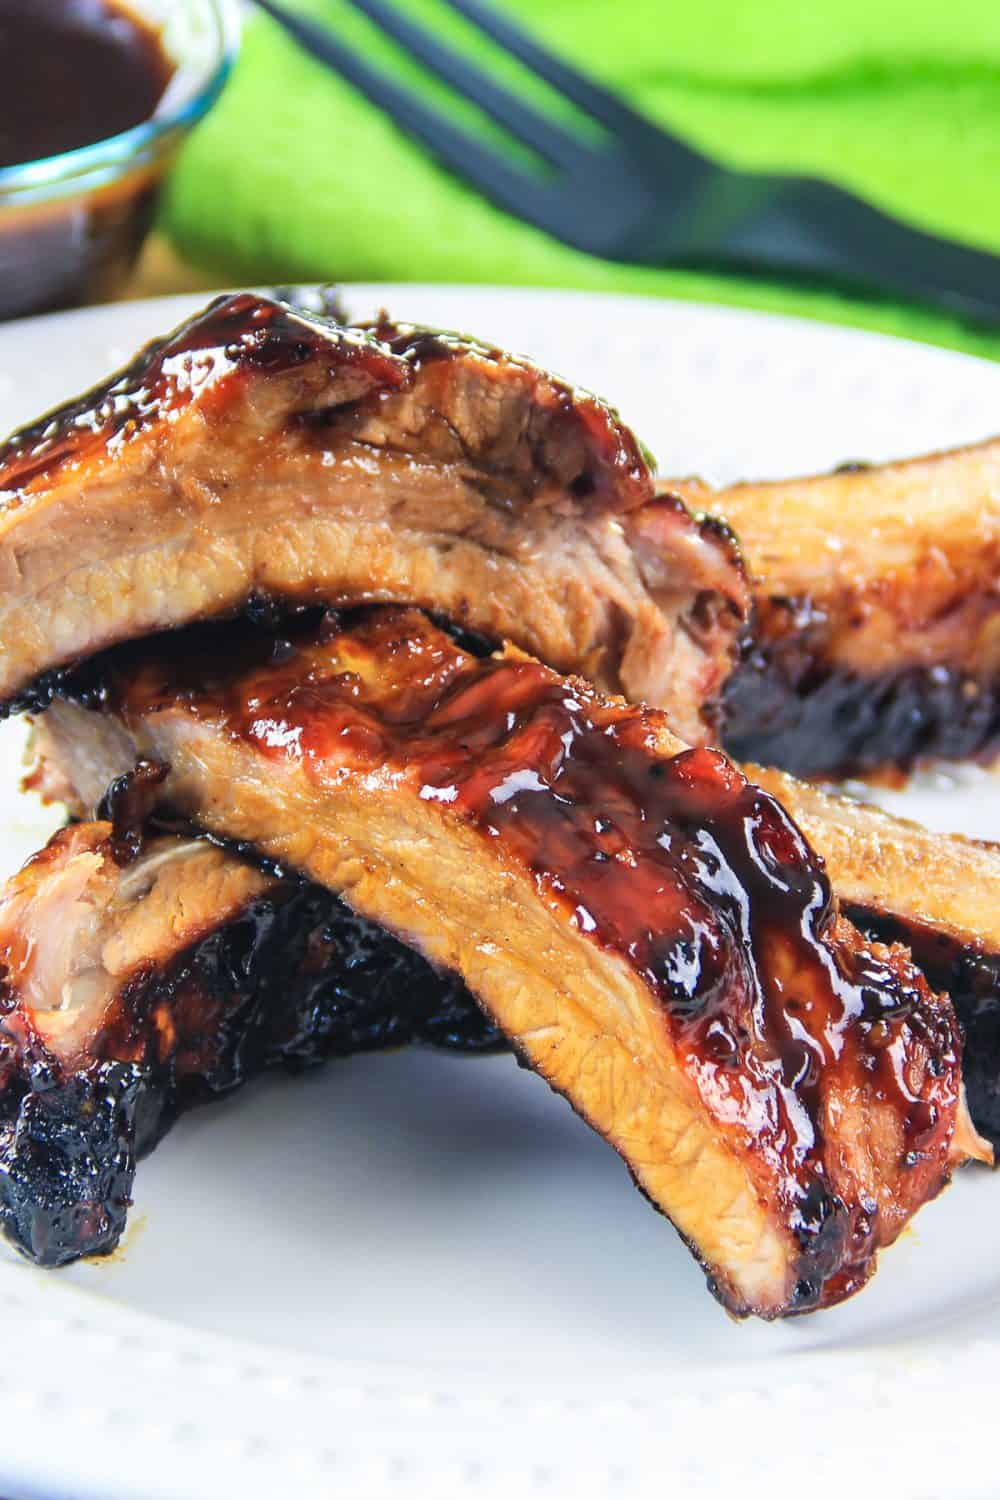 Barbecue Pork Ribs Simply Home Cooked,How Long To Cook Shrimp On Grill At 350